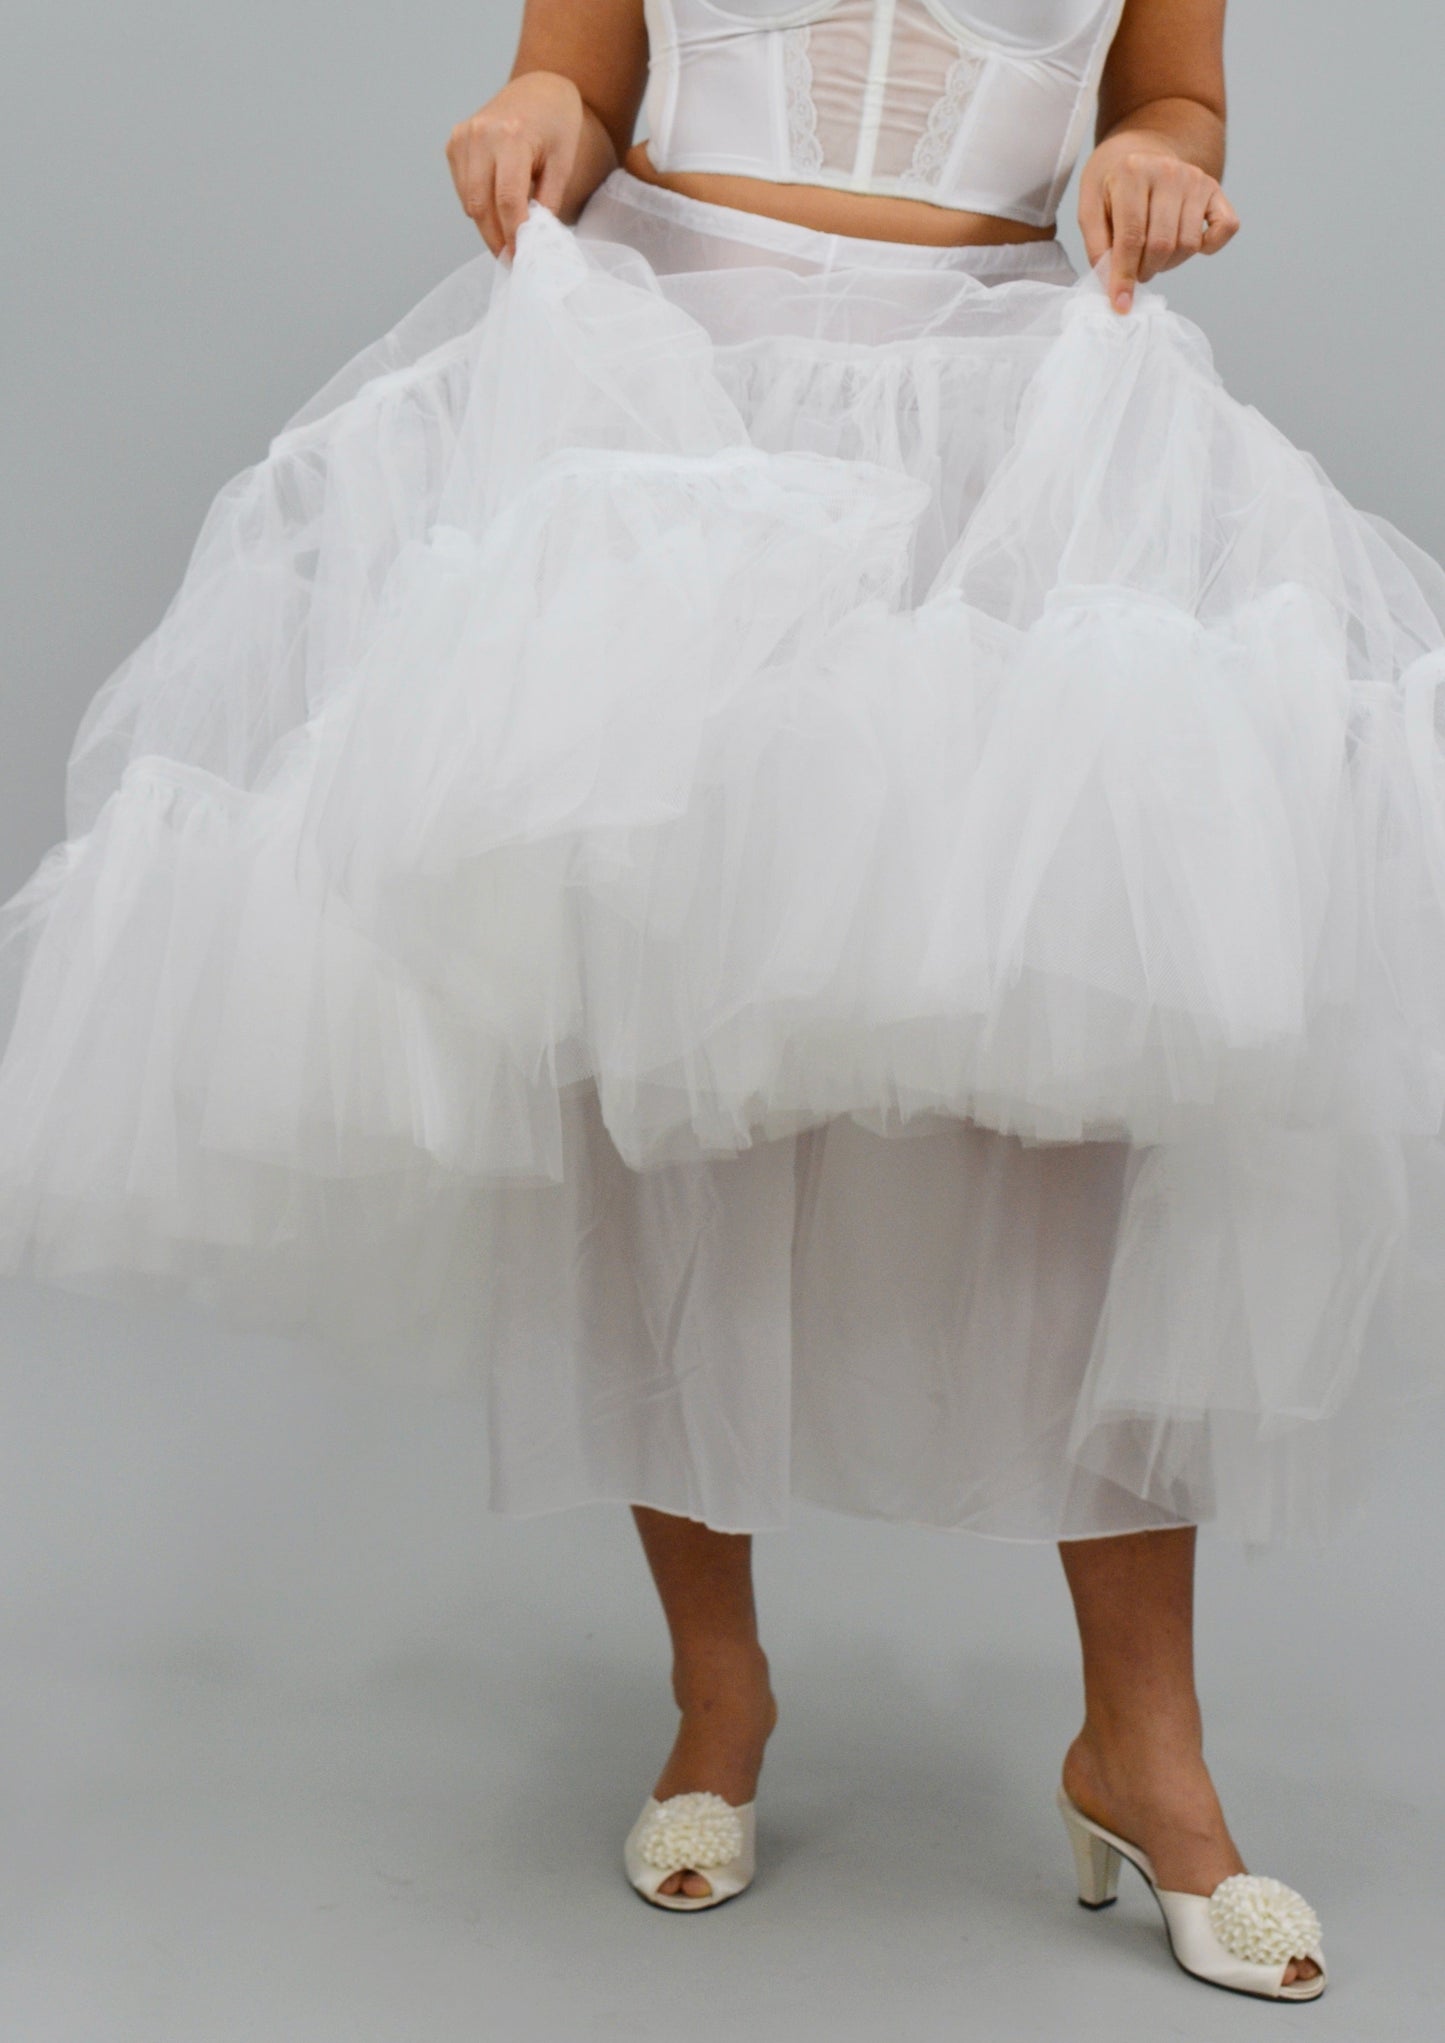 The Cecil Sheer Tulle Petticoat Skirt